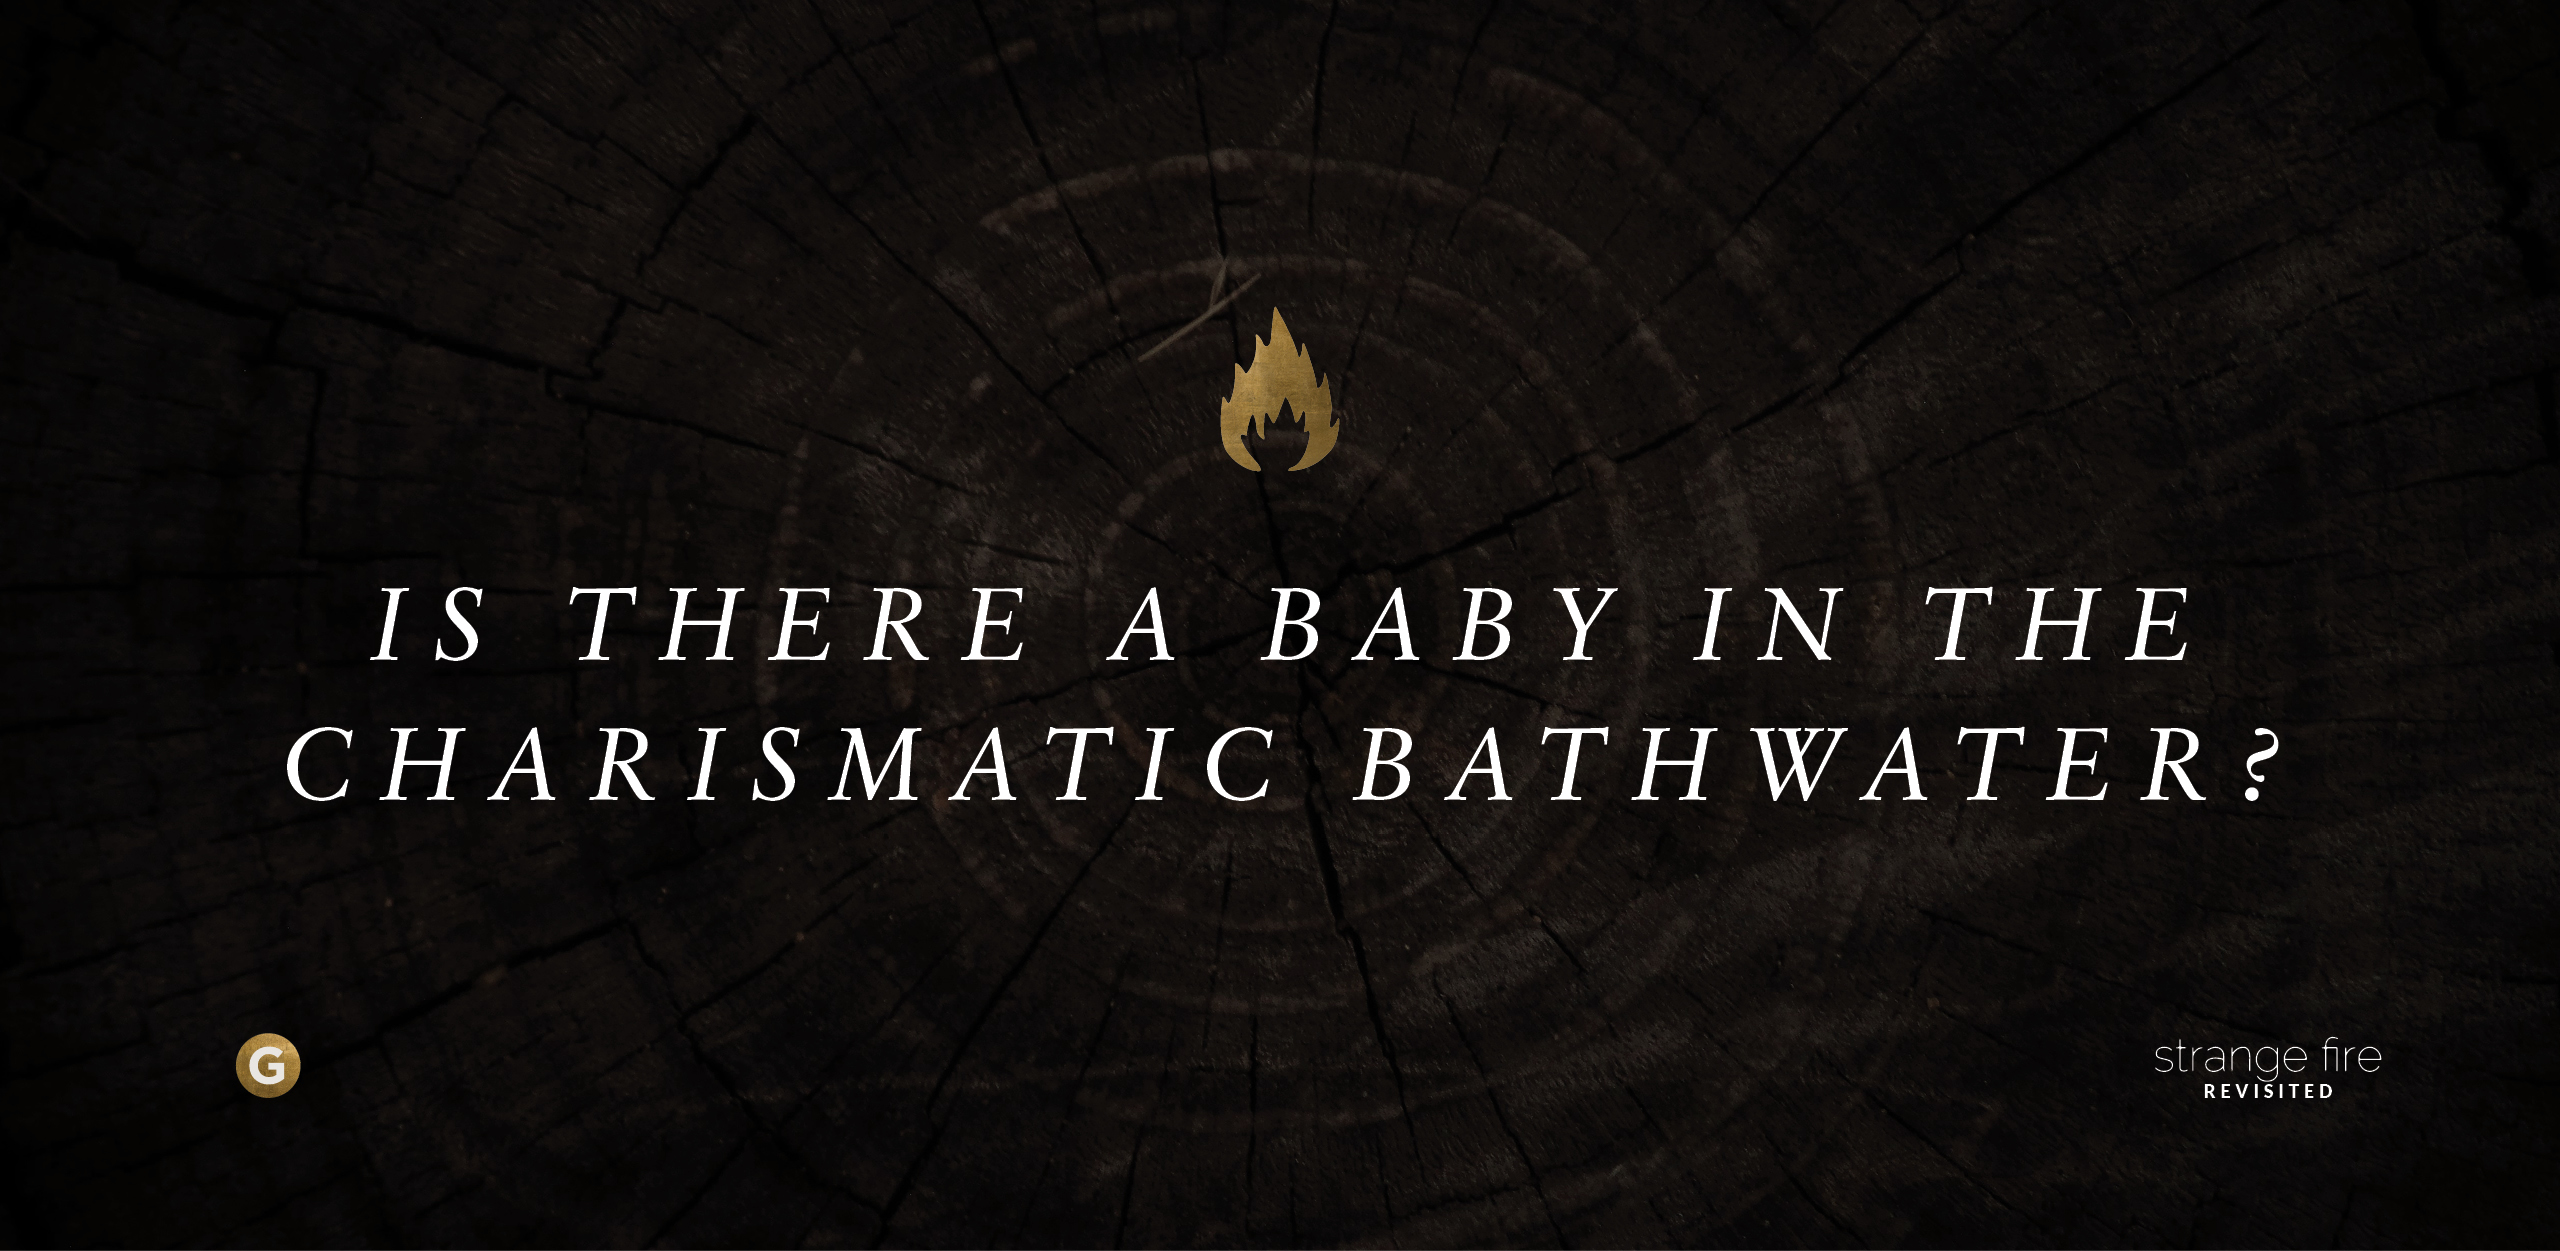 Strange Fire Revisited: Is There a Baby in the Charismatic Bathwater?